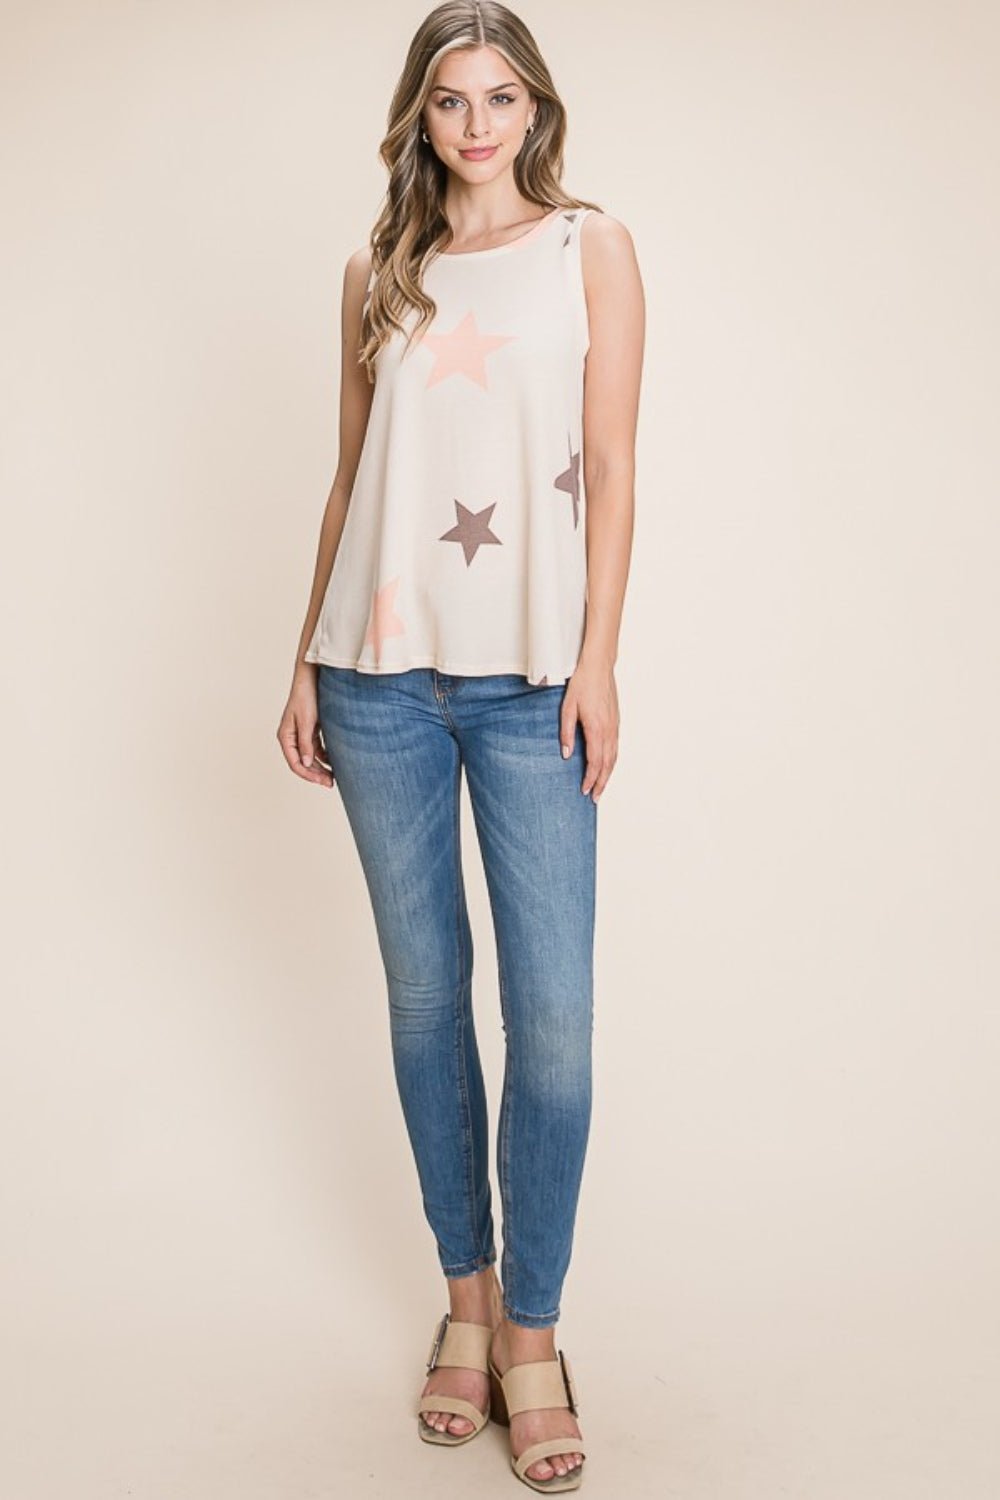 BOMBOM Star Print Round Neck Tank - Happily Ever Atchison Shop Co.